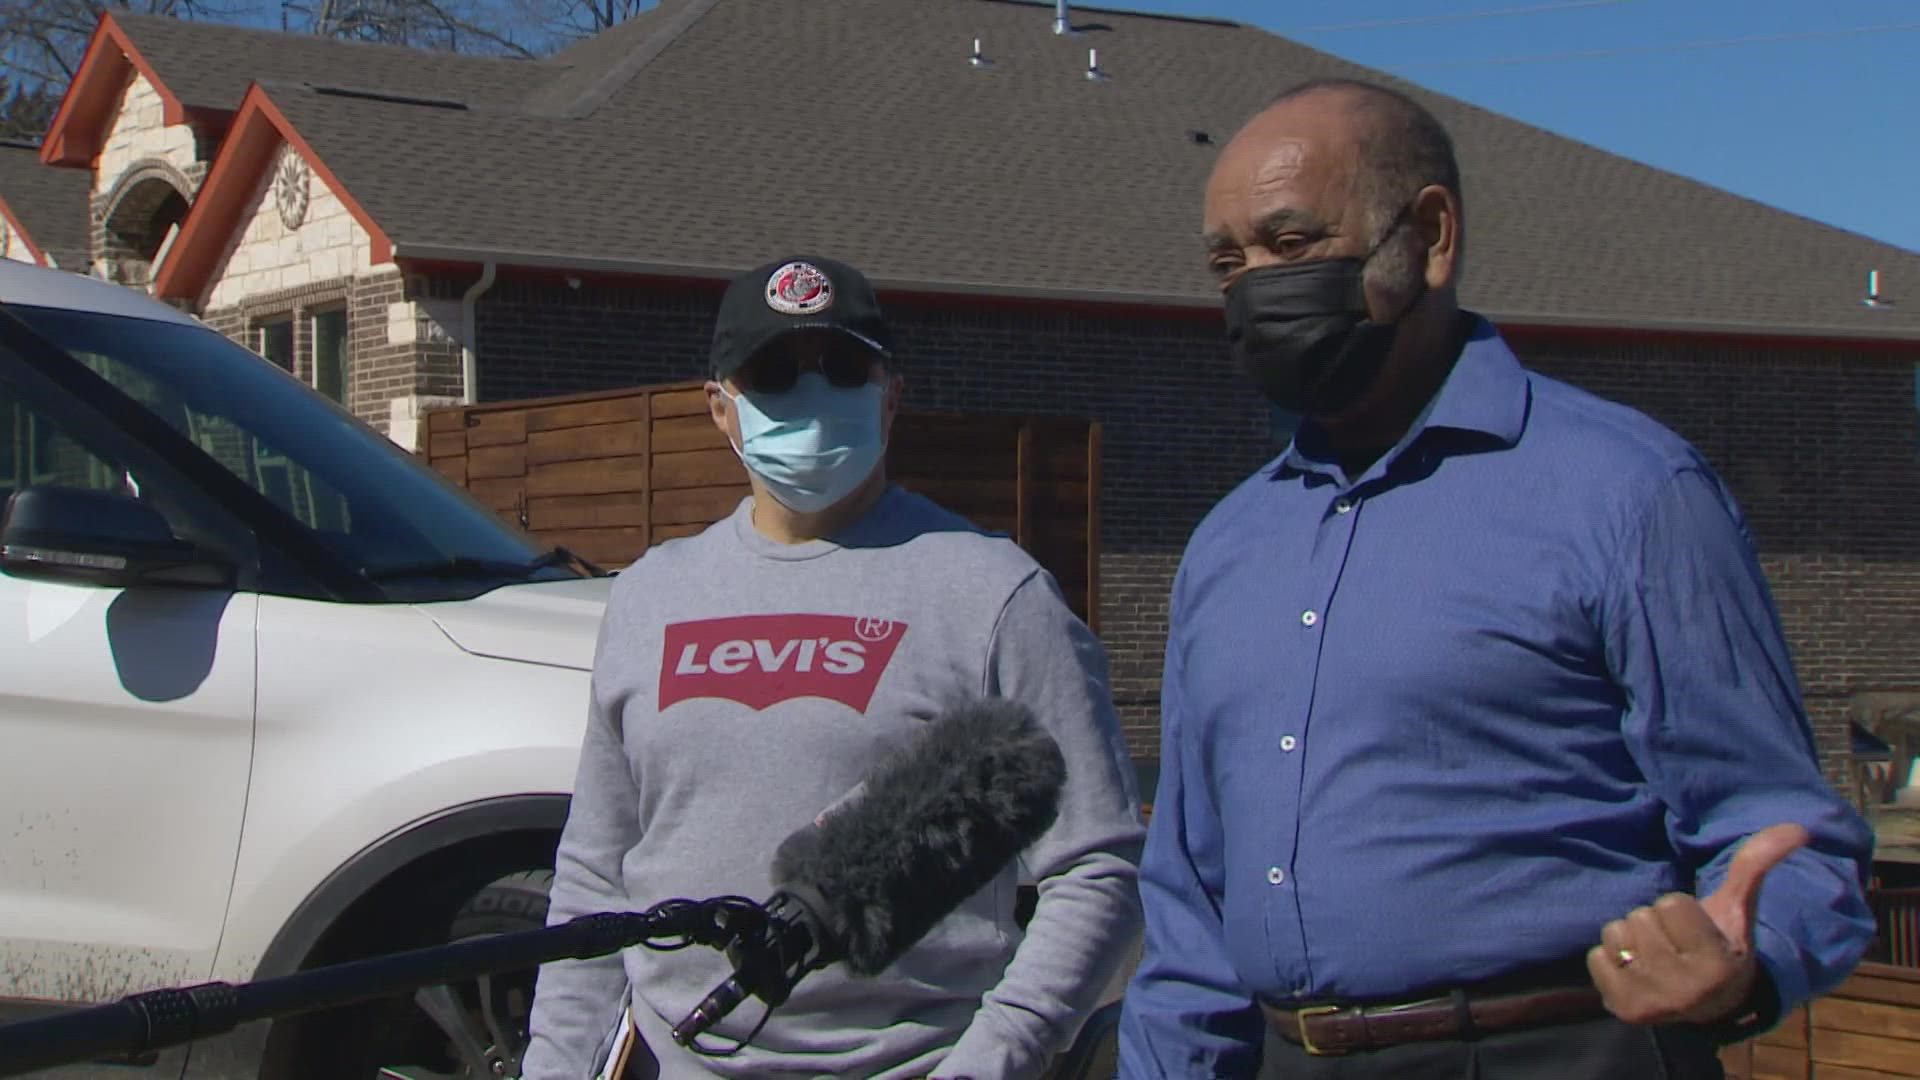 Willie Gonzalez and Carl Hays are two neighbors in Oak Cliff who are frustrated with the rental across the street.